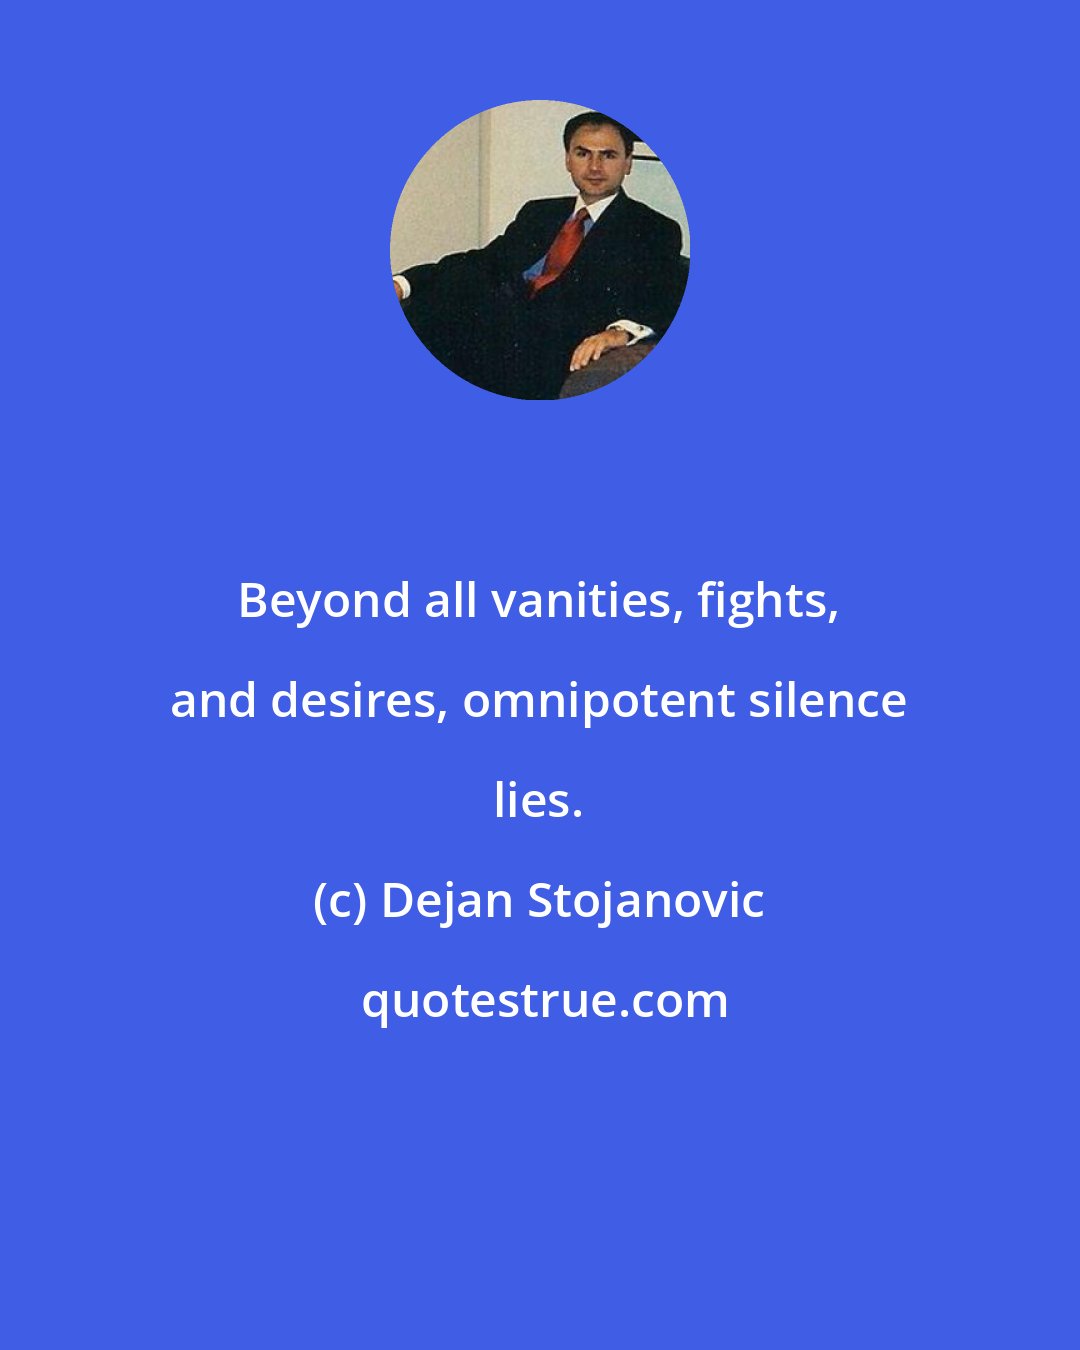 Dejan Stojanovic: Beyond all vanities, fights, and desires, omnipotent silence lies.